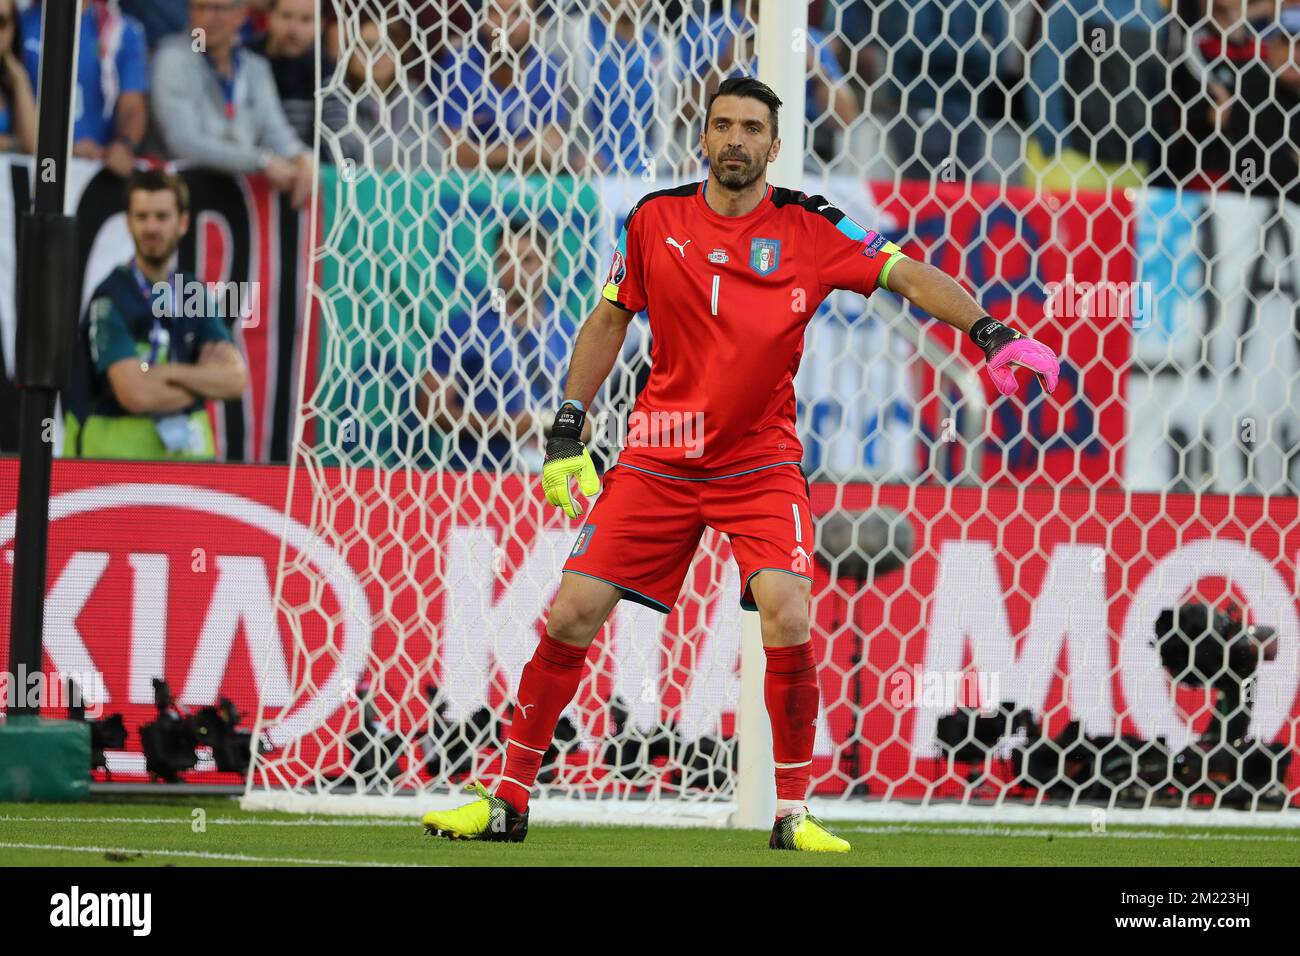 Italy's goalkeeper Gianluigi Buffon pictured during a soccer game between German team and Italian team, in the quarter-finals of the UEFA Euro 2016 European Championships, on Friday 01 July 2016, in Bordeaux, France.  Stock Photo